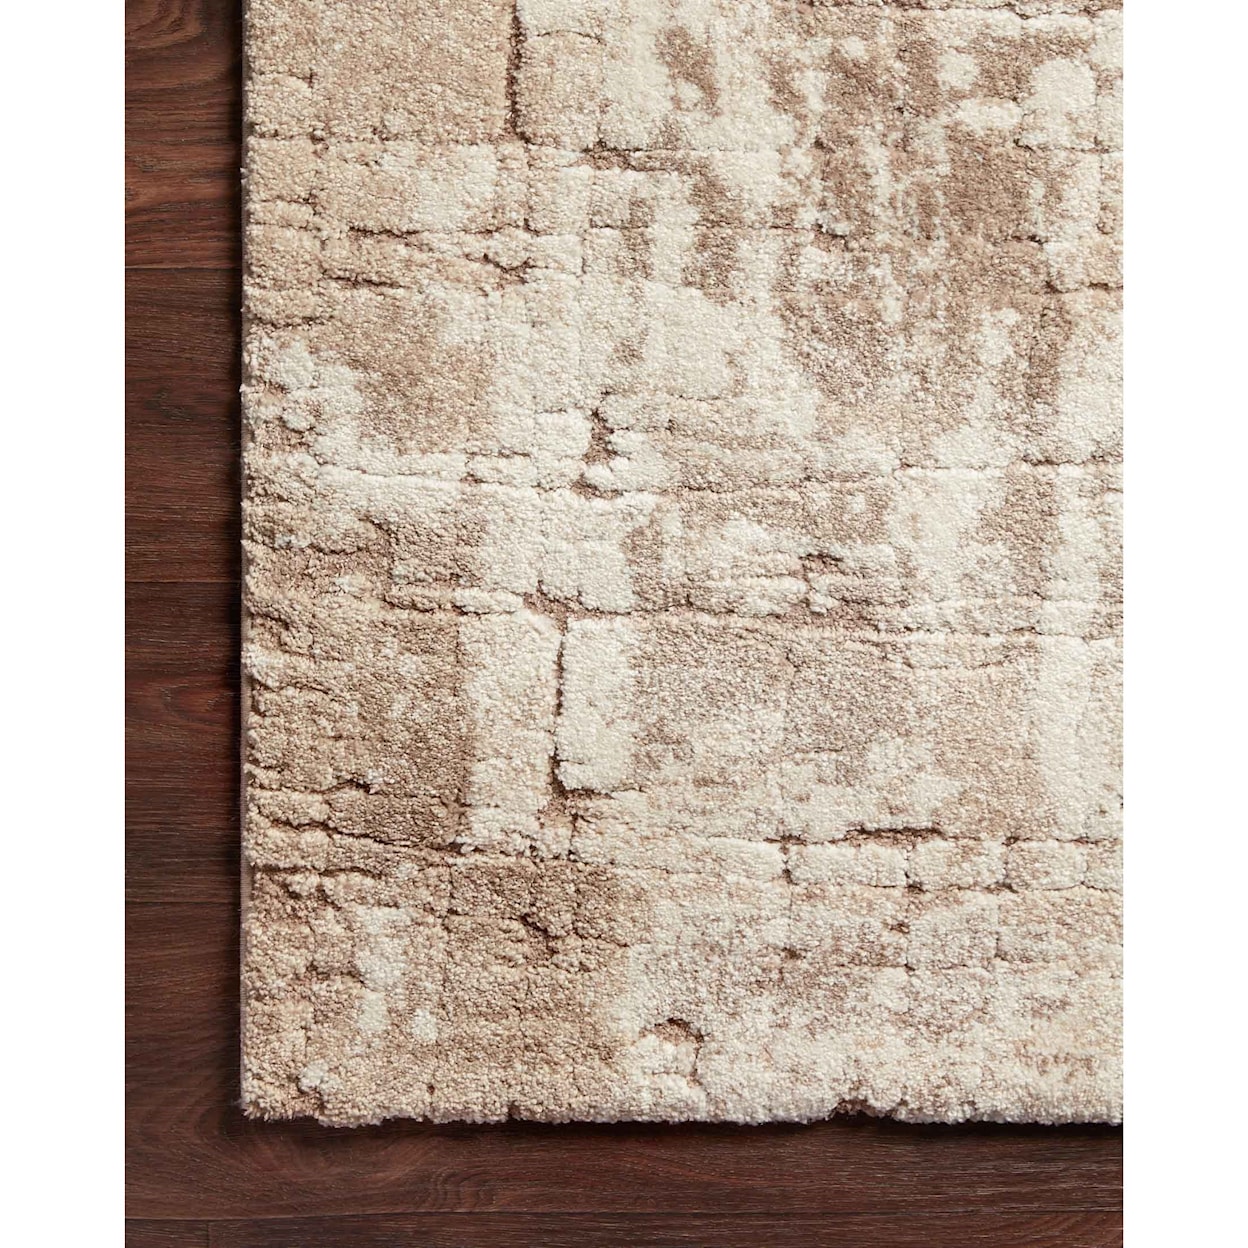 Loloi Rugs Theory 9'6" x 13' Beige / Taupe Rug